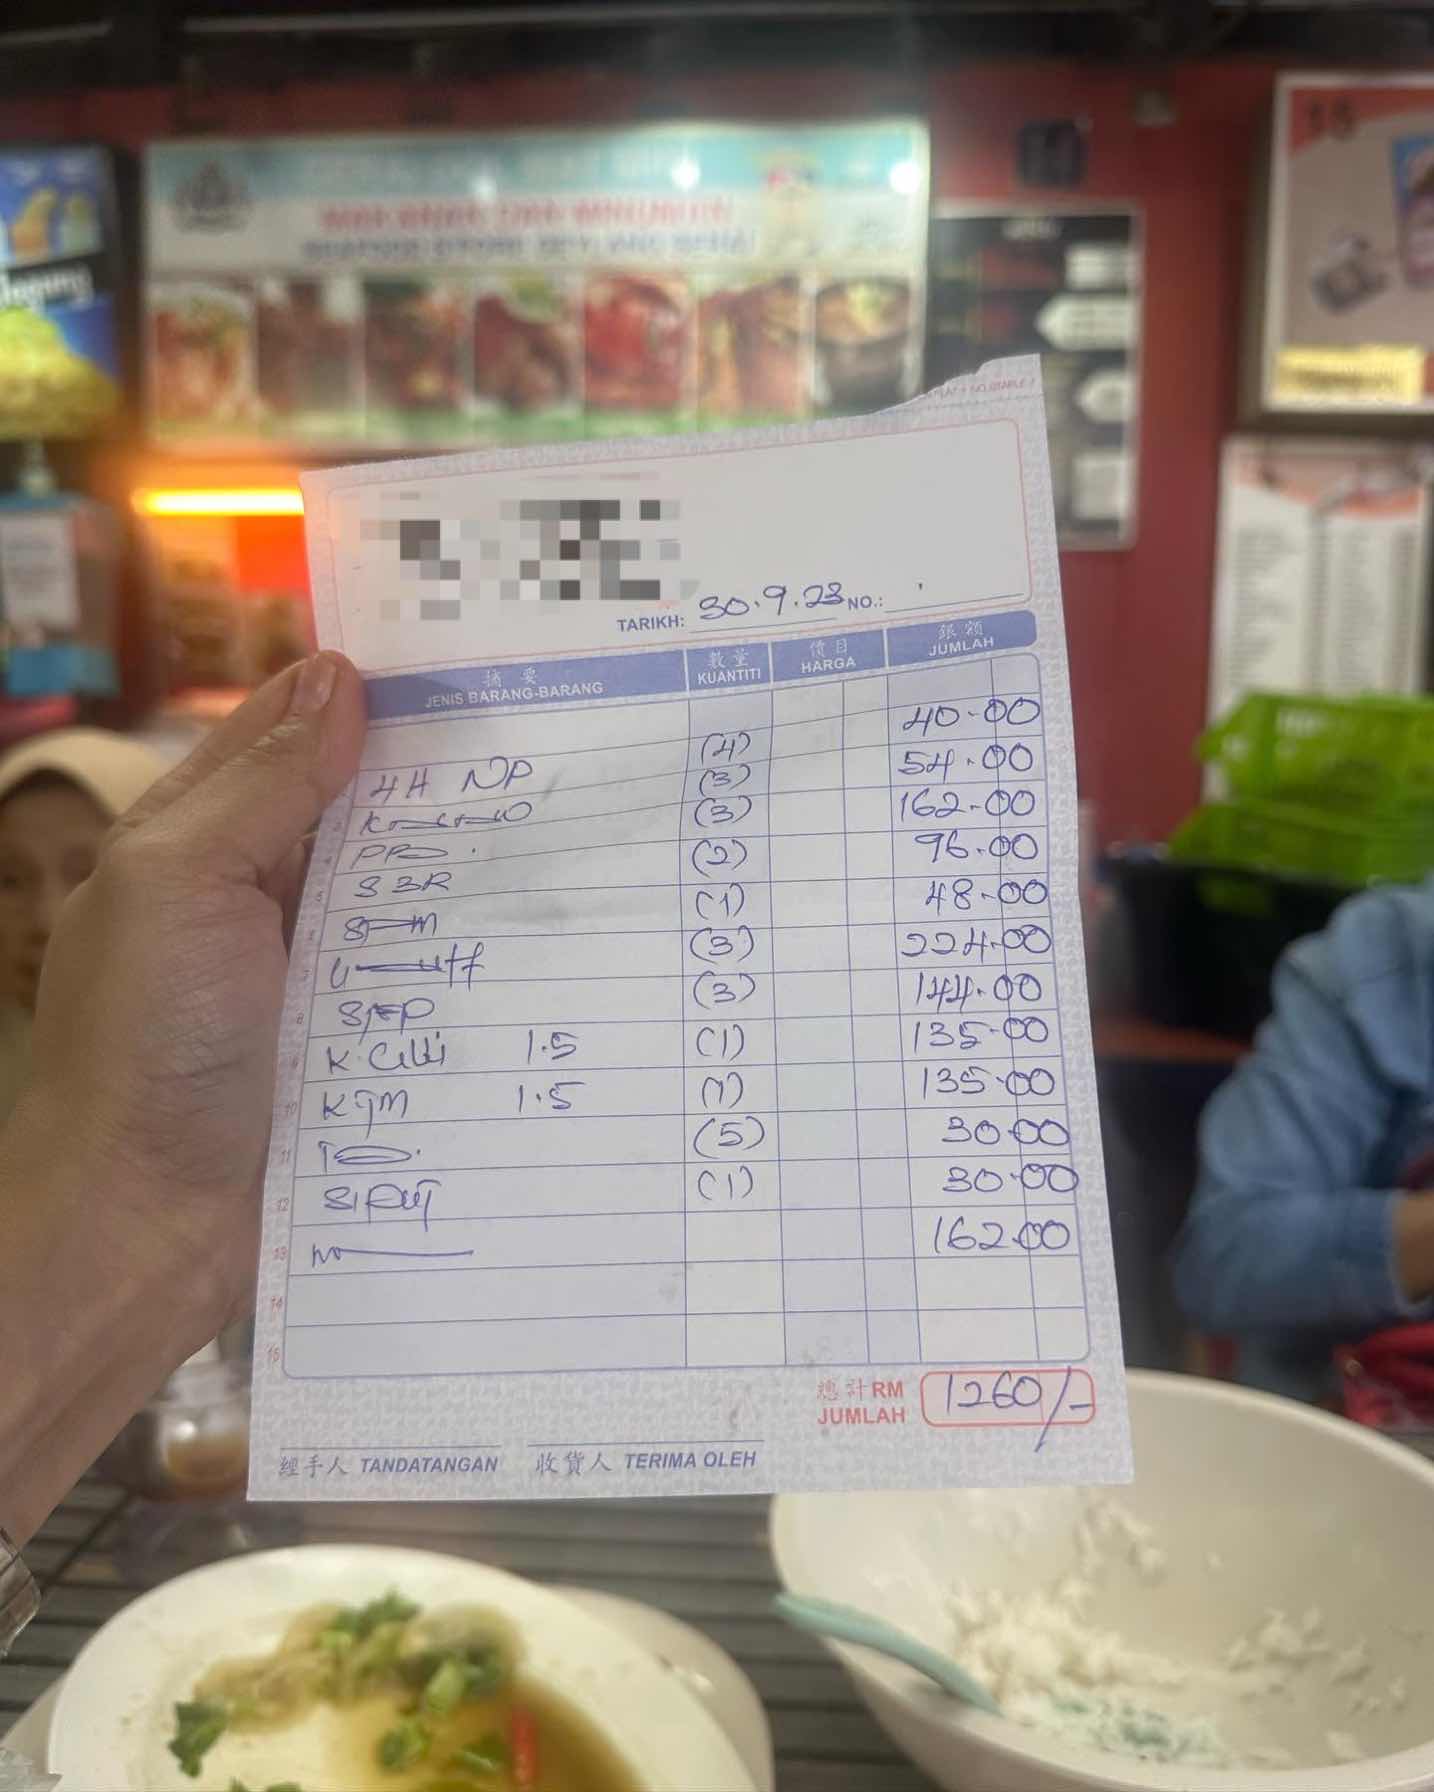 M'sian family shocked over being billed rm1,260 at jb food court | weirdkaya